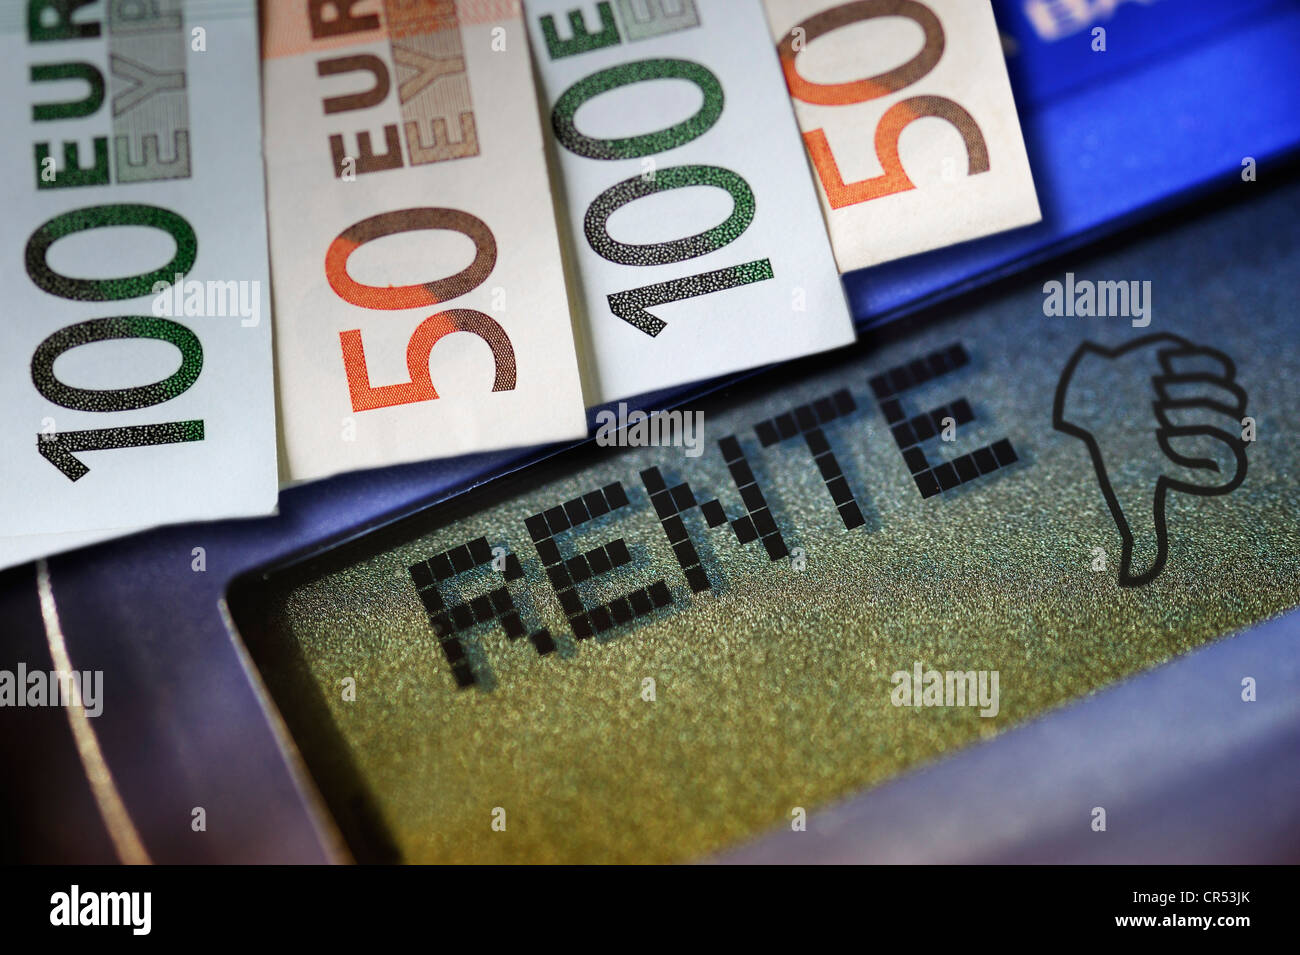 Lettering 'Rente', German for 'pension' on a calculator and banknotes, thumbs down icon, symbolic image for low pensions Stock Photo